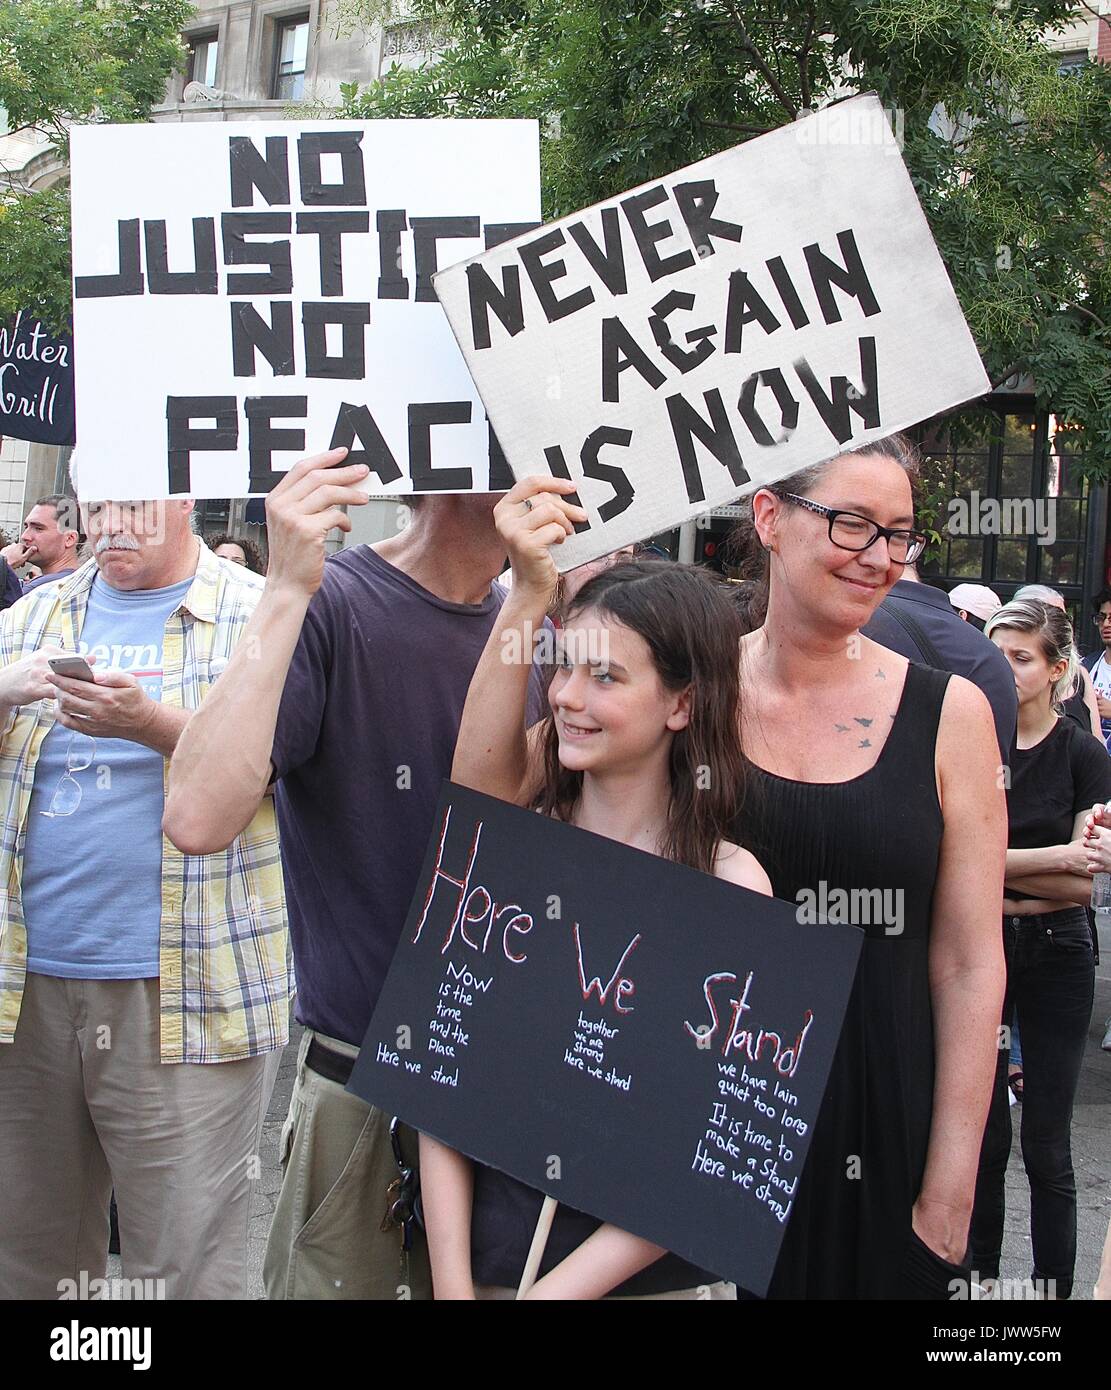 New York, NY, USA. 13th Aug, 2017. Rally, held in Union Square, in response to the Charlottesville, Virginia tragedy where during a White supremacist rally on the campus of the University of Virginia one person was killed and several injured when a car plowed into a group protesting the presence of the white supremacists in New York, New York on August 13, 2017. Credit: Rainmaker Photo/Media Punch/Alamy Live News Stock Photo